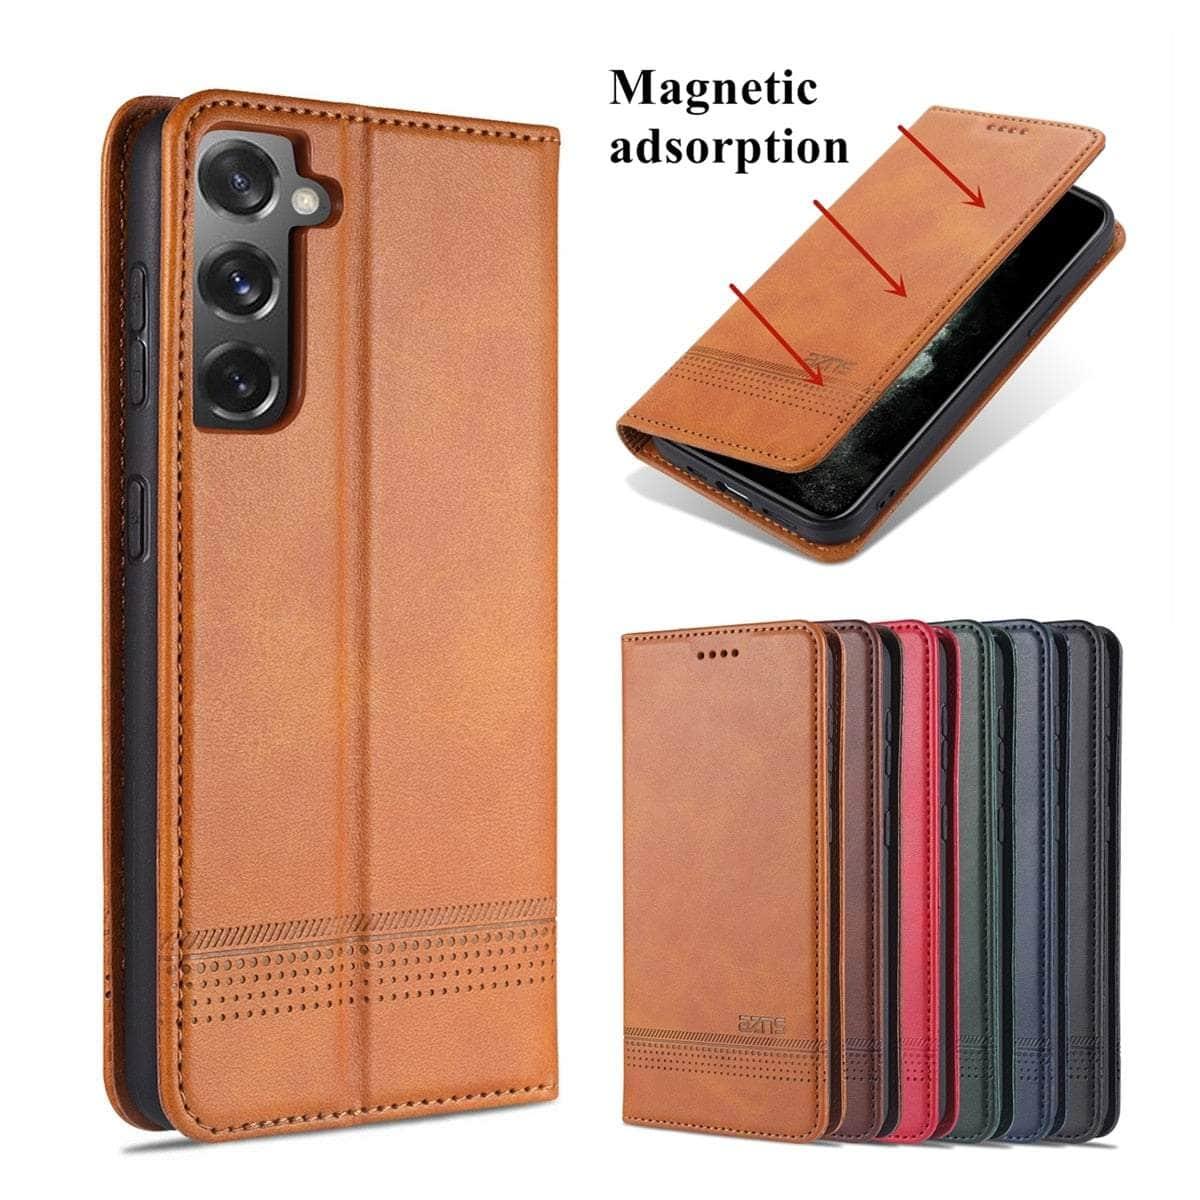 CaseBuddy Australia Casebuddy Deluxe Magnetic Heat Adsorption S22 Ultra Leather Case